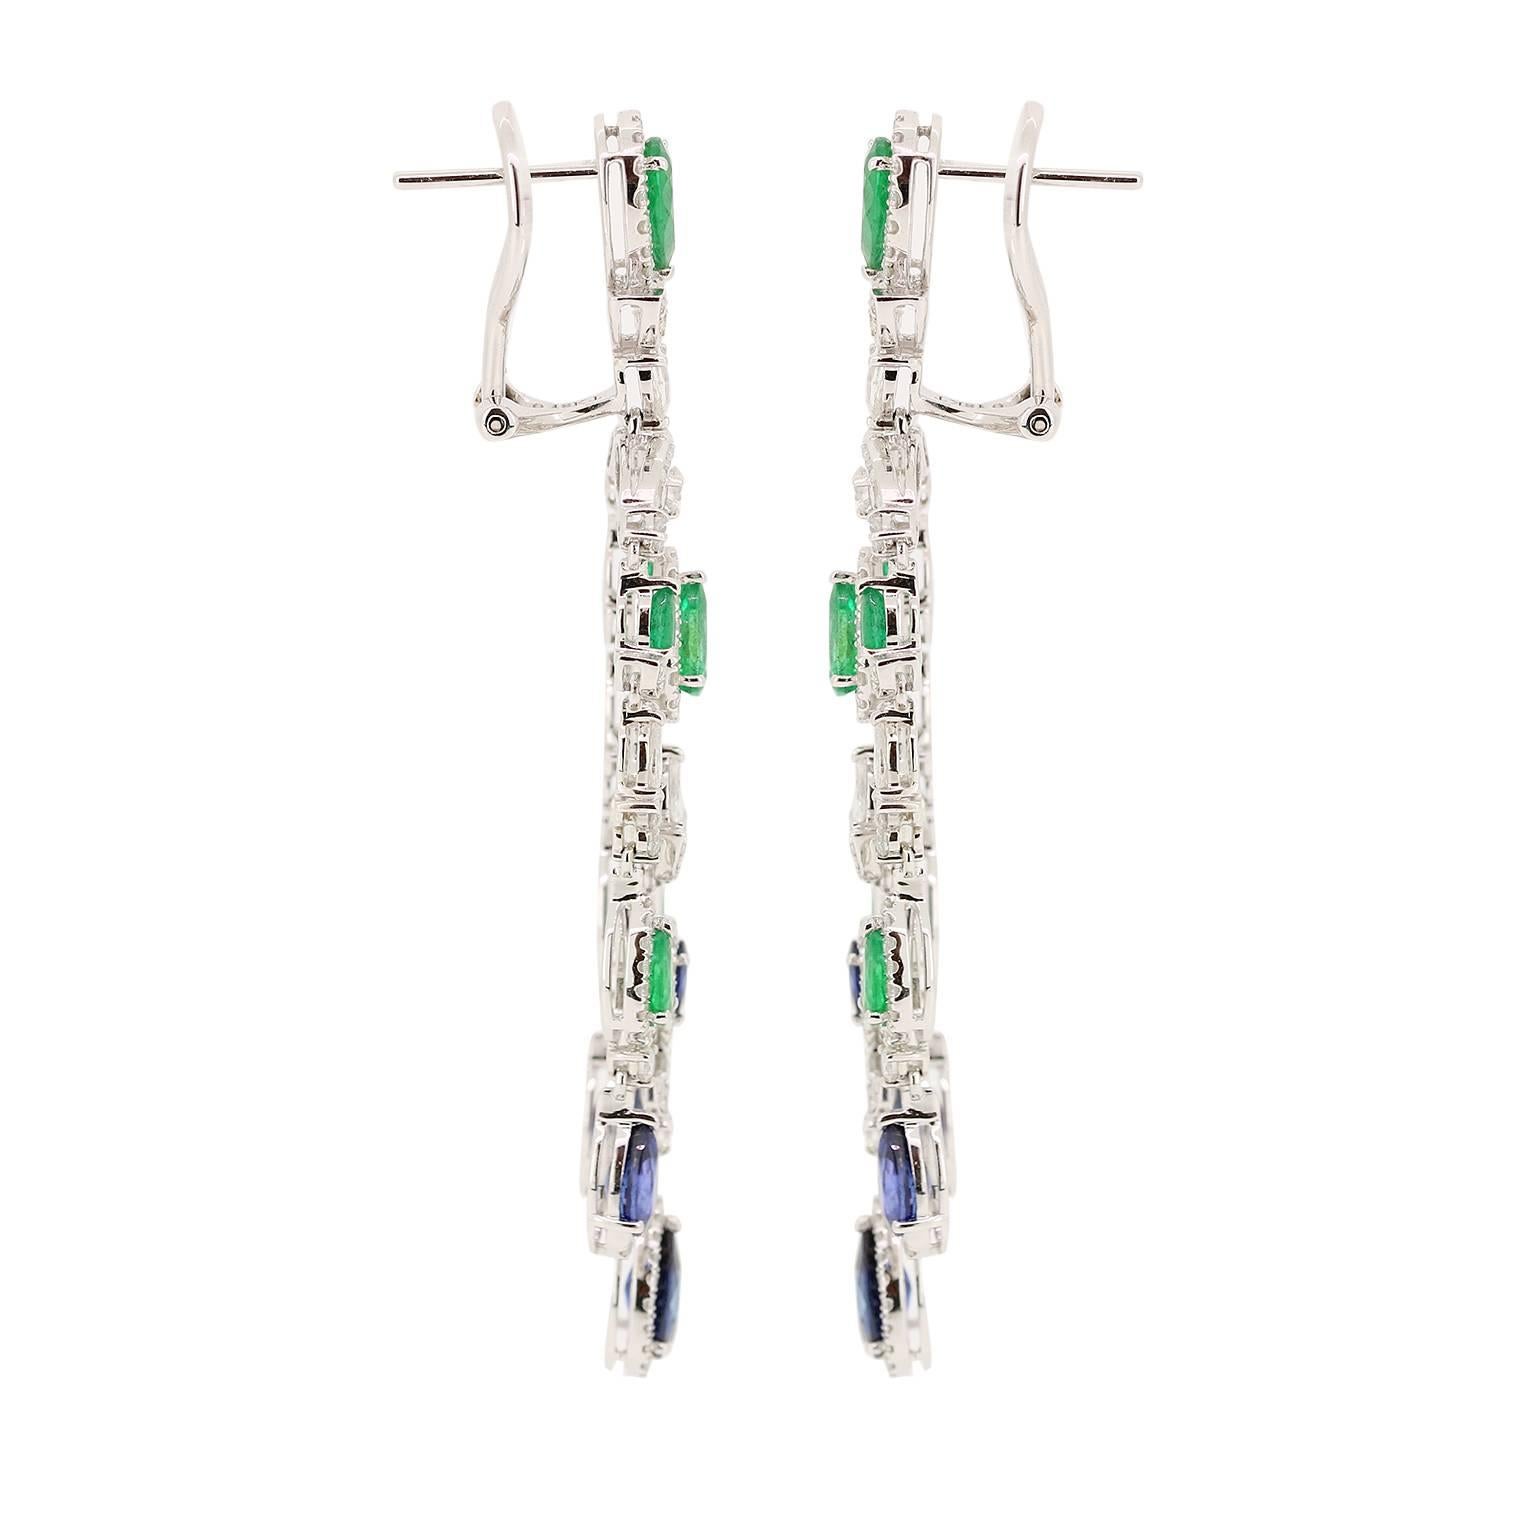 Exotic Blue Sapphire, Emerald and Diamond chandelier earring is the perfect accessory to a black tie affair.  You will be the bell of the ball with these earrings on. Dazzel the night away!

Blue Sapphire approx. - 4.15 carats
Emerald approx. - 2.85